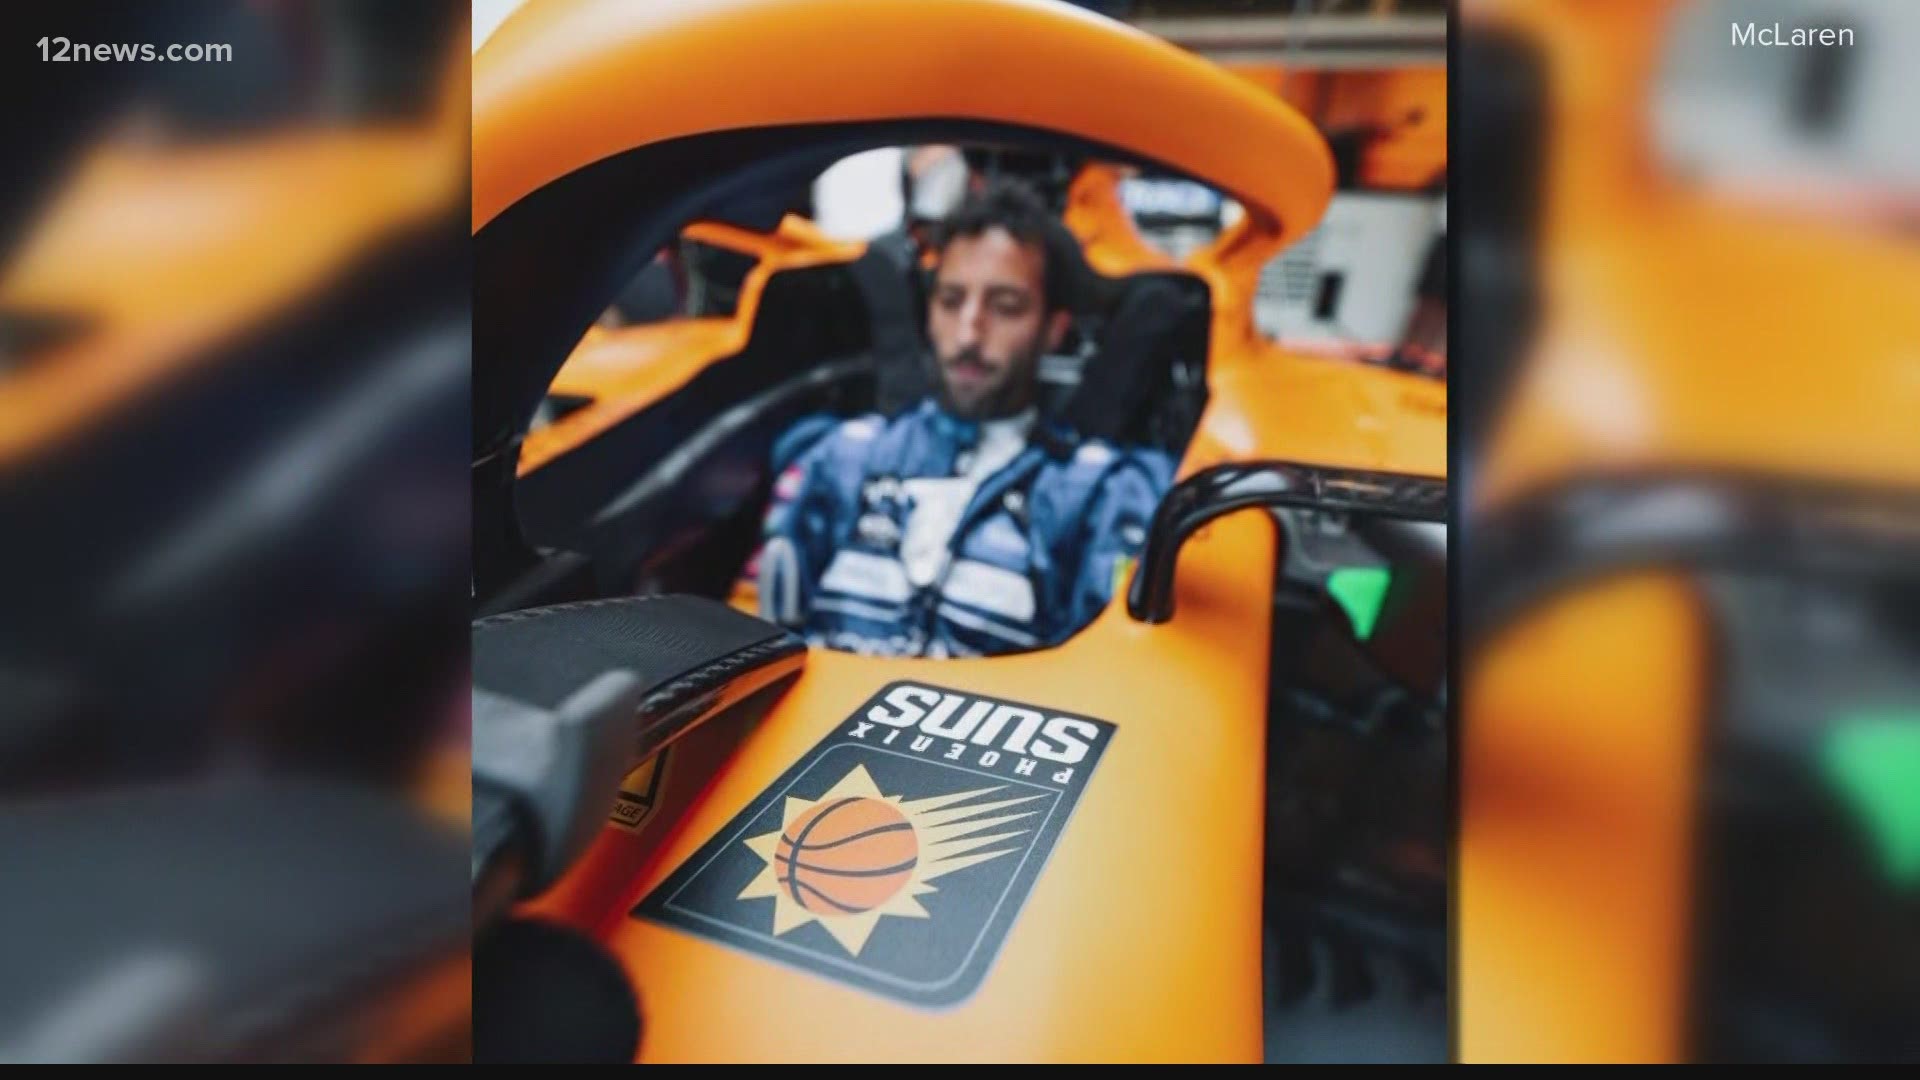 Part owner of McLaren Formula 1 team and Phoenix Suns shows support of both teams.